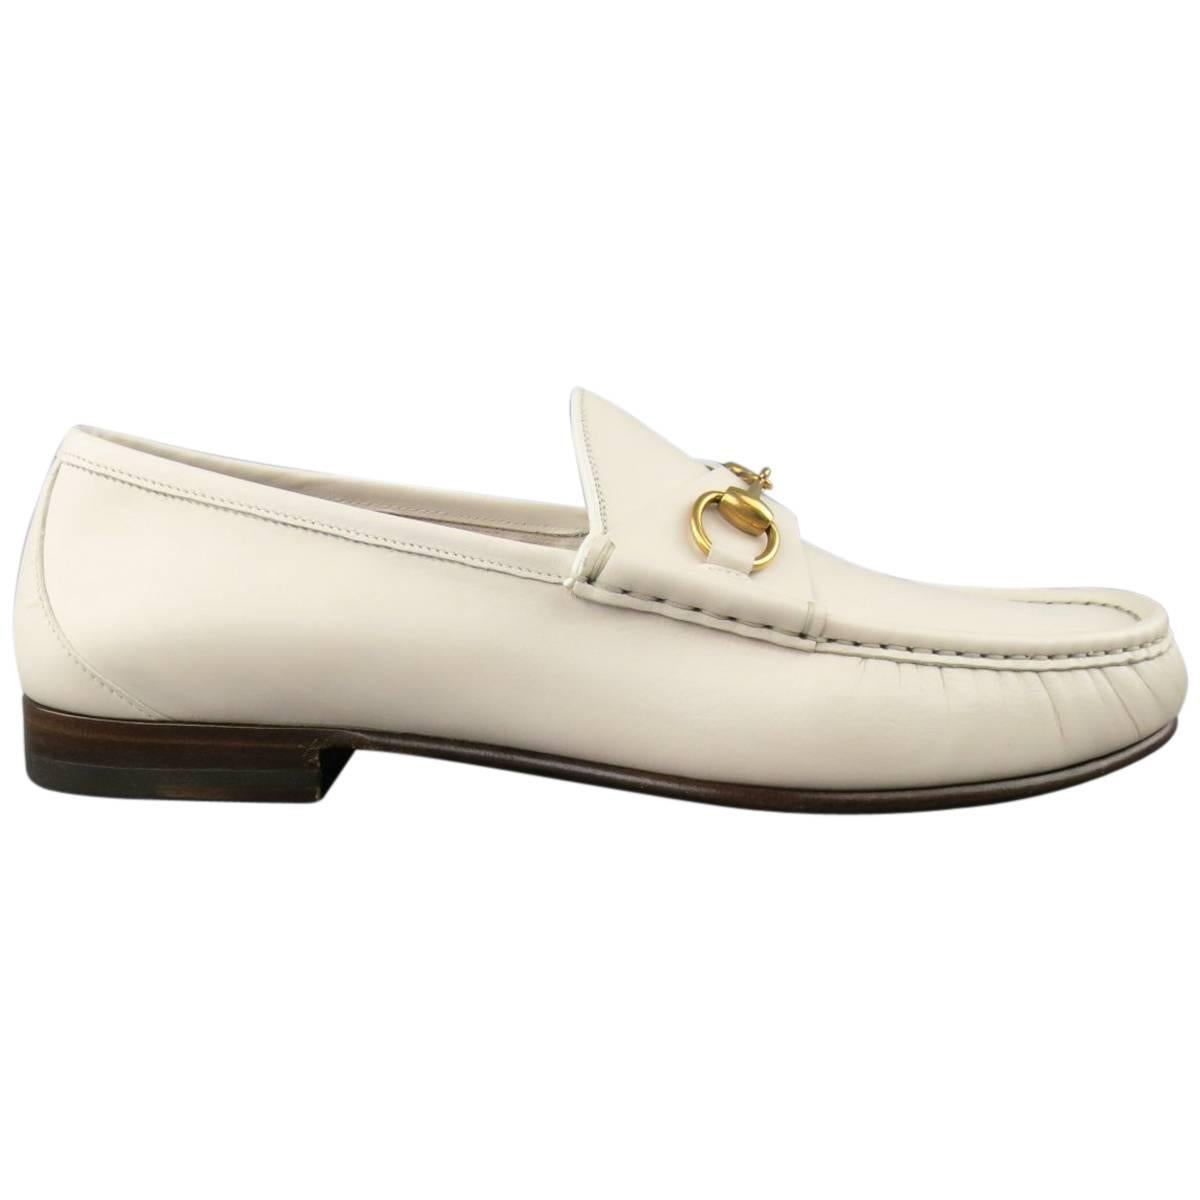 New Men's GUCCI Size 10.5 Off White Leather Gold Horsebit Loafers